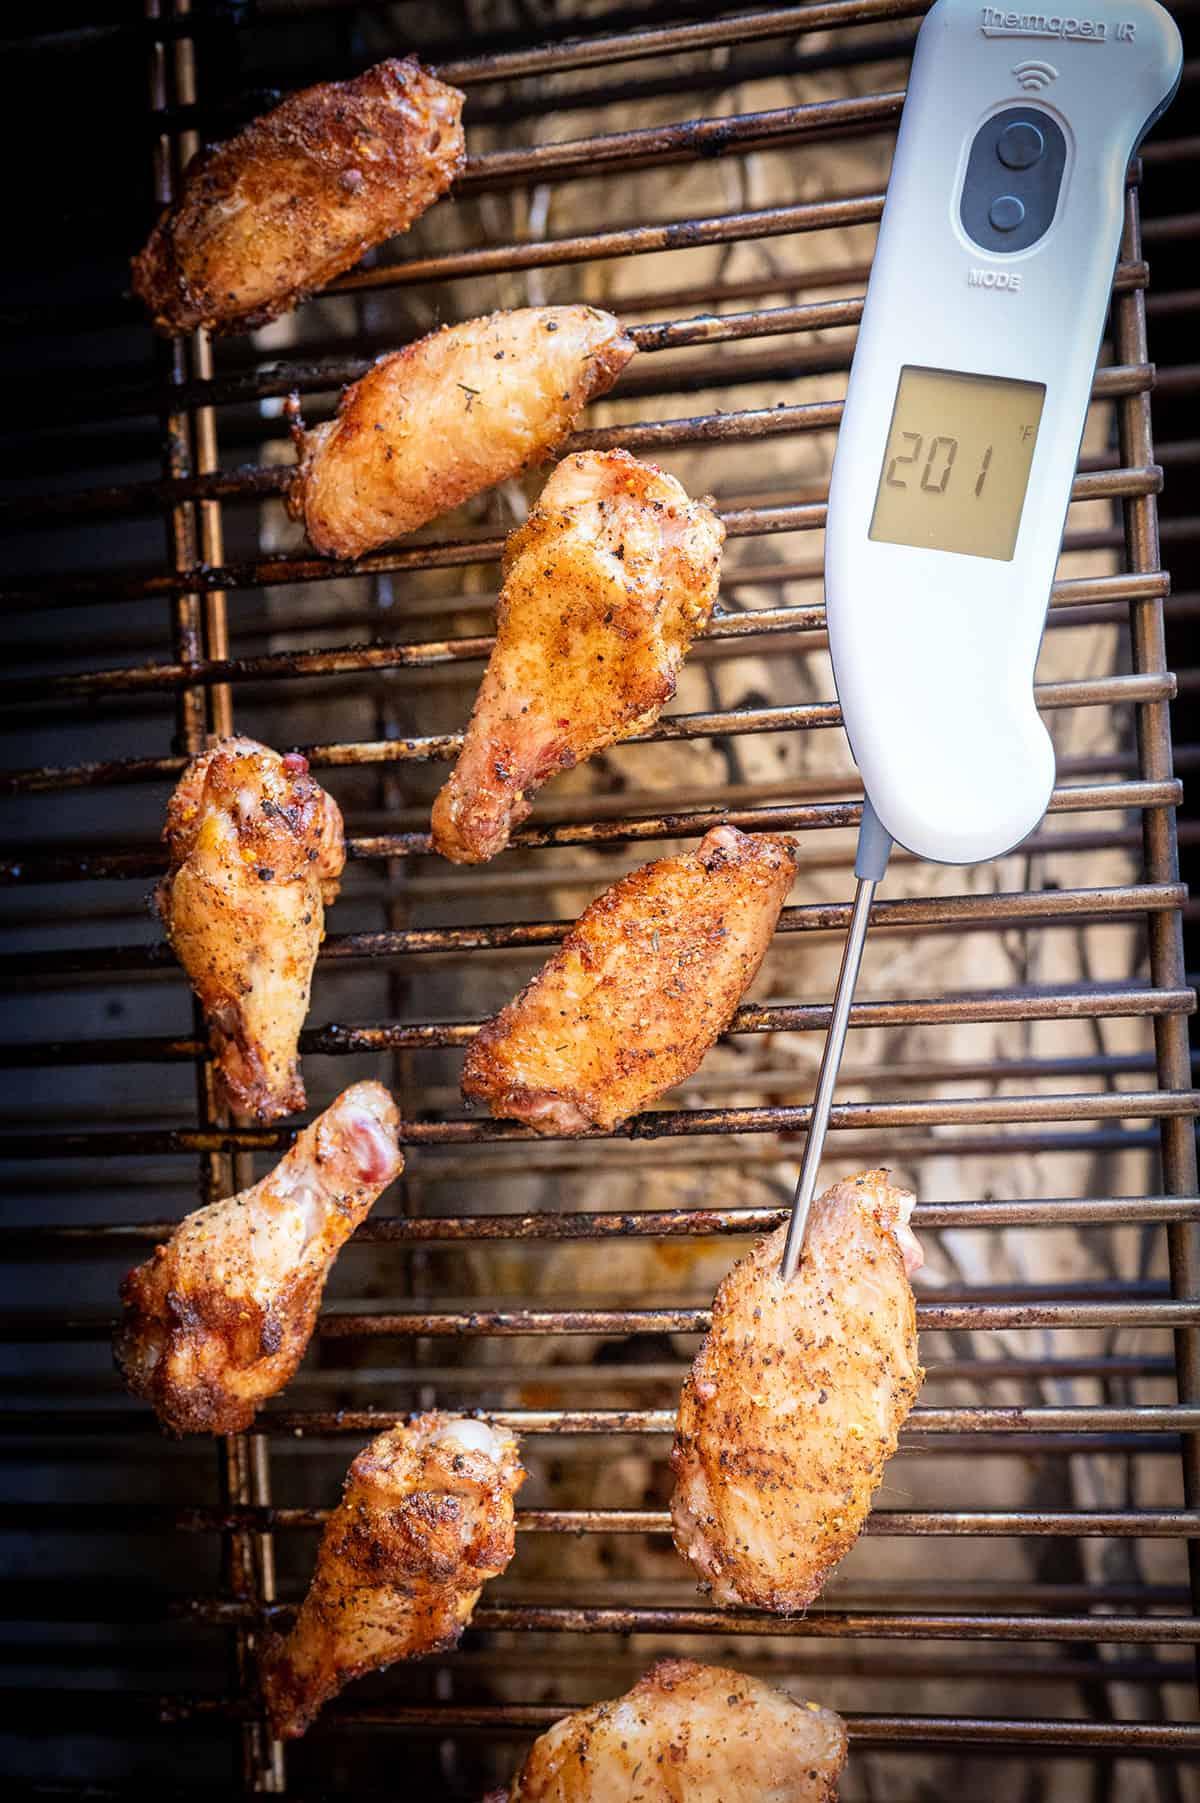 Using a meat thermometer to measure the temperature of a grilled chicken wing.